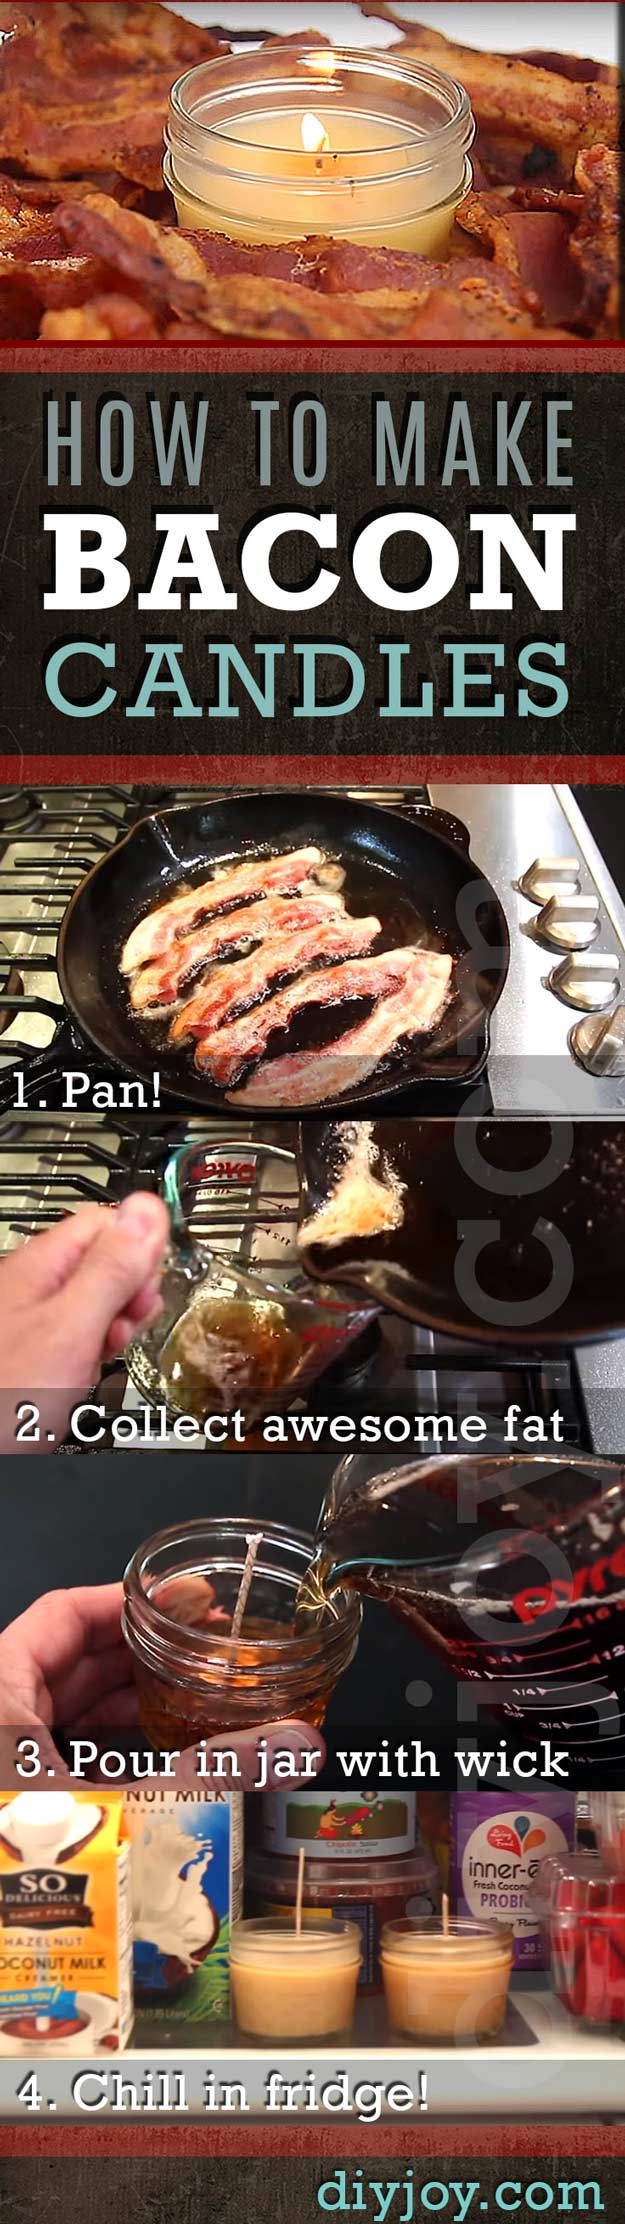 How To Make Bacon Candles - Fun DIY Projects and Cool Crafts For Men 